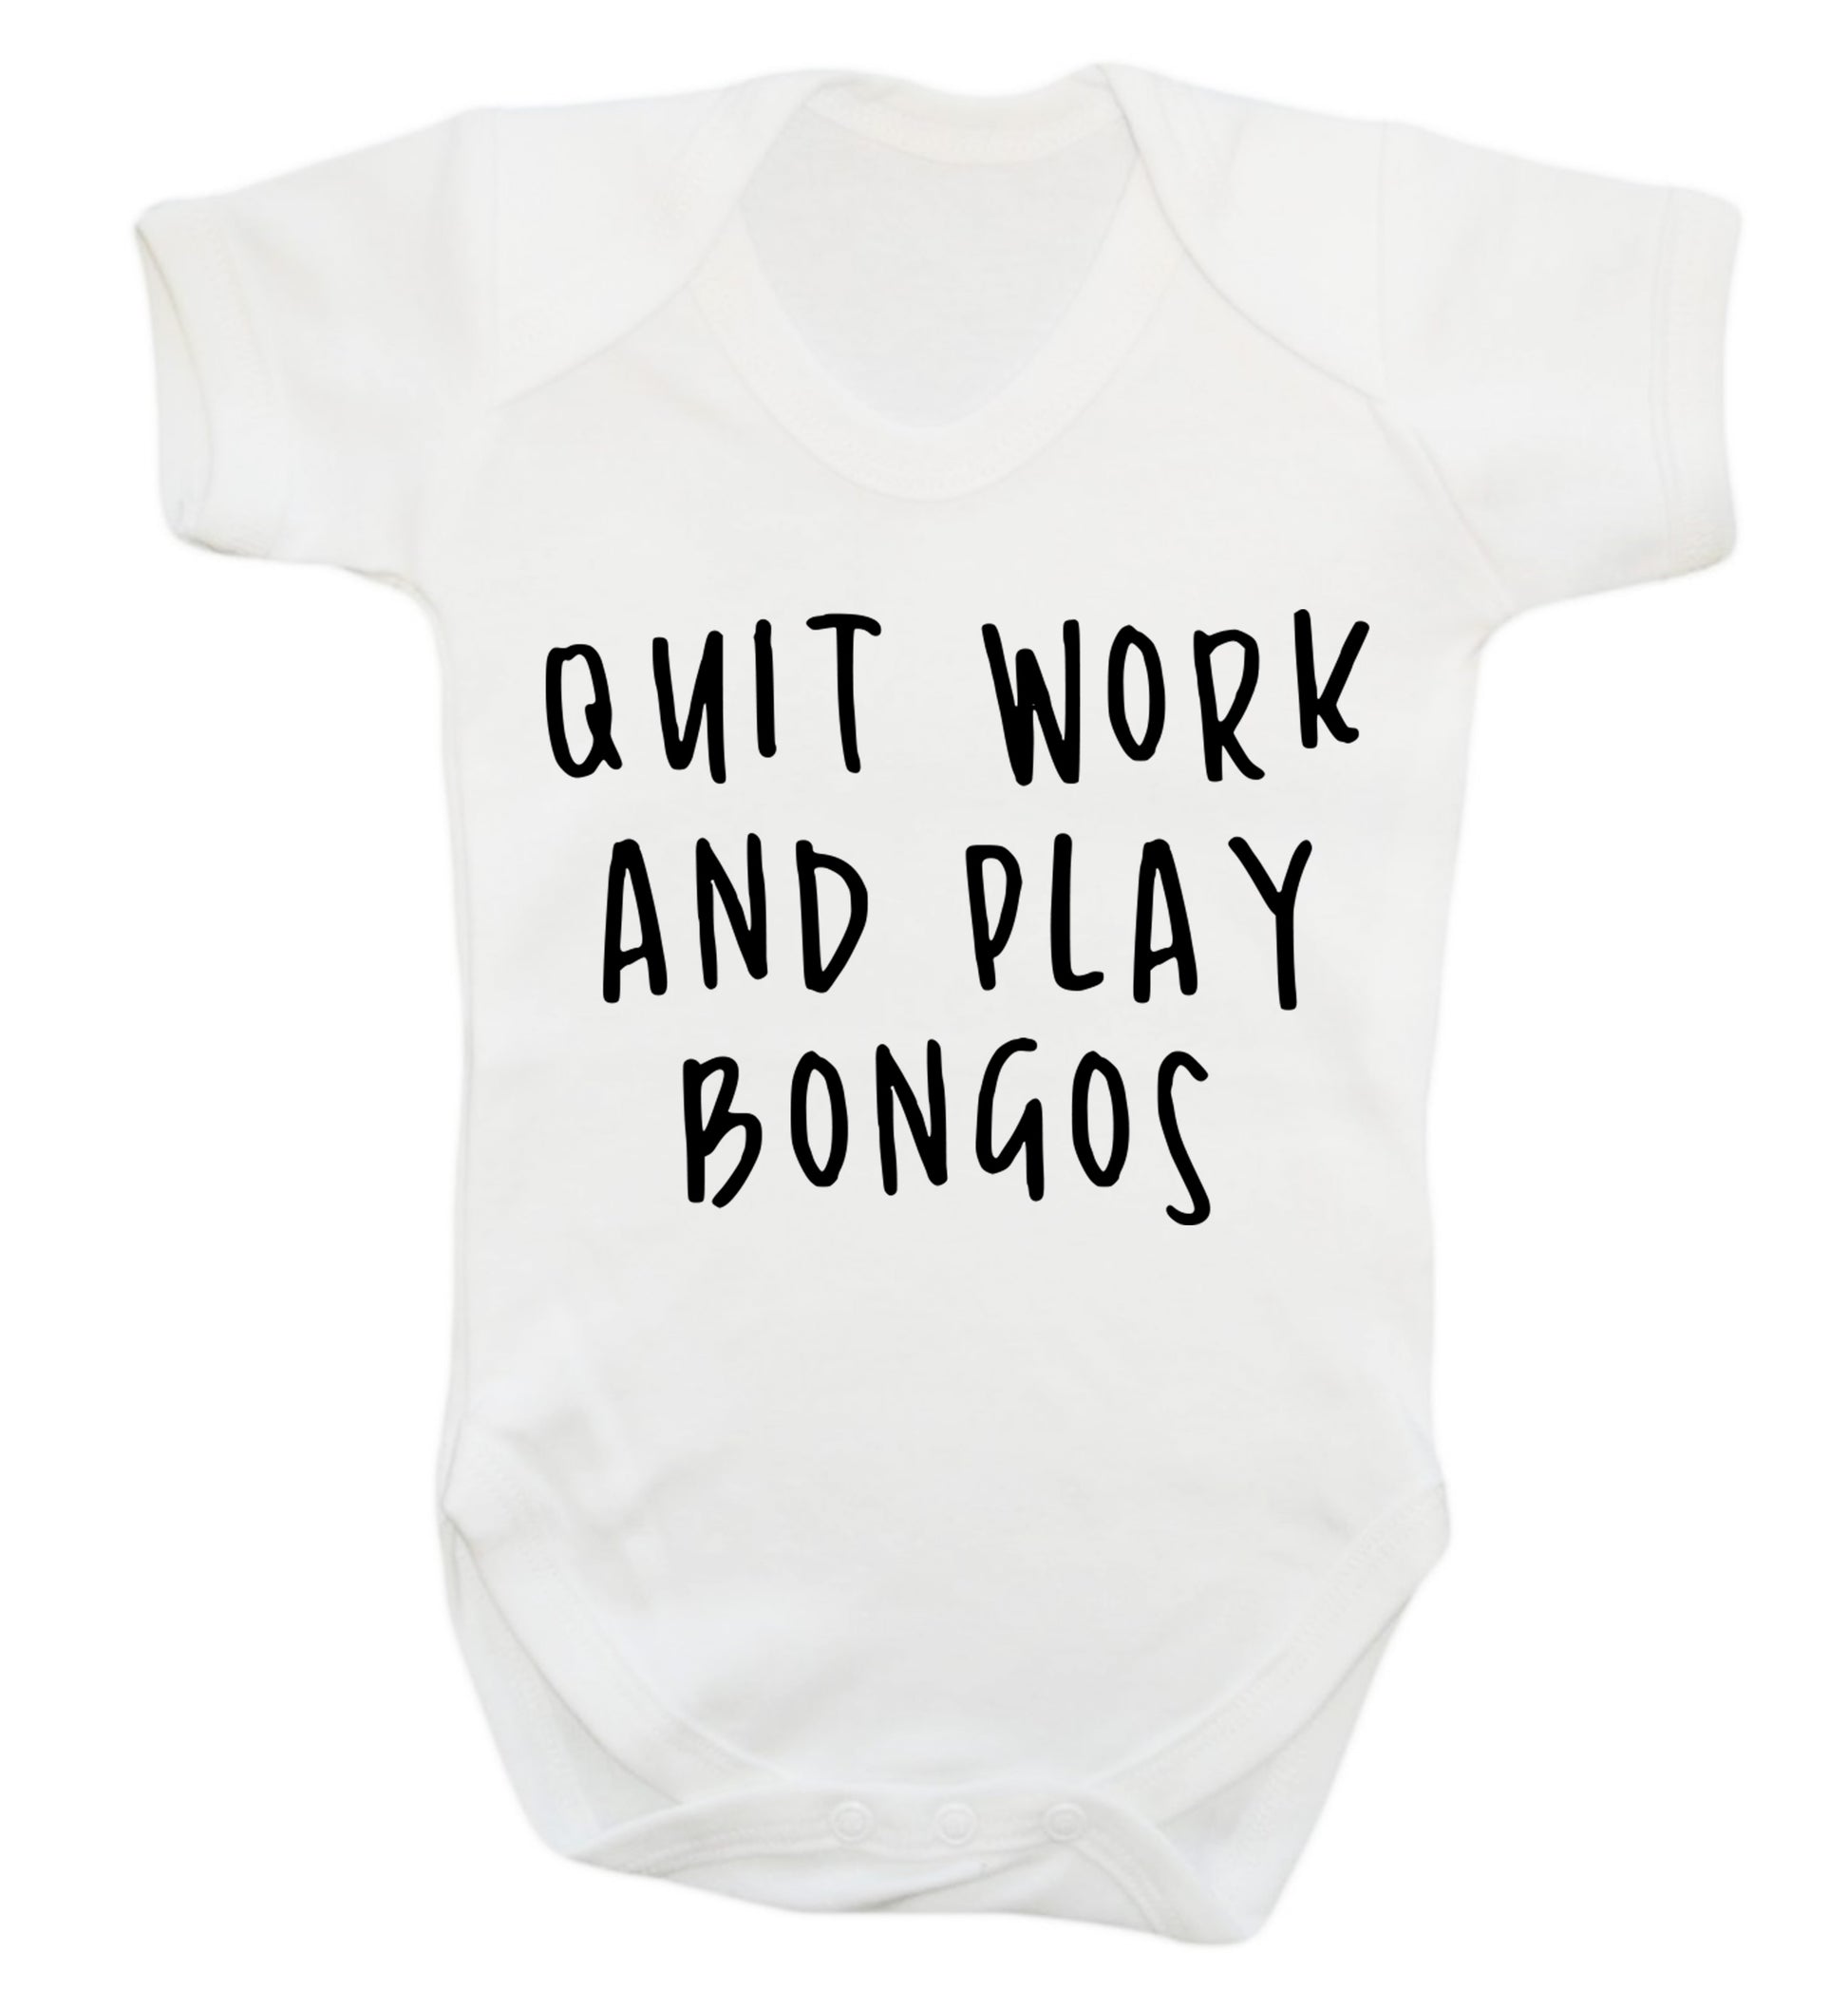 Quit work and play bongos Baby Vest white 18-24 months